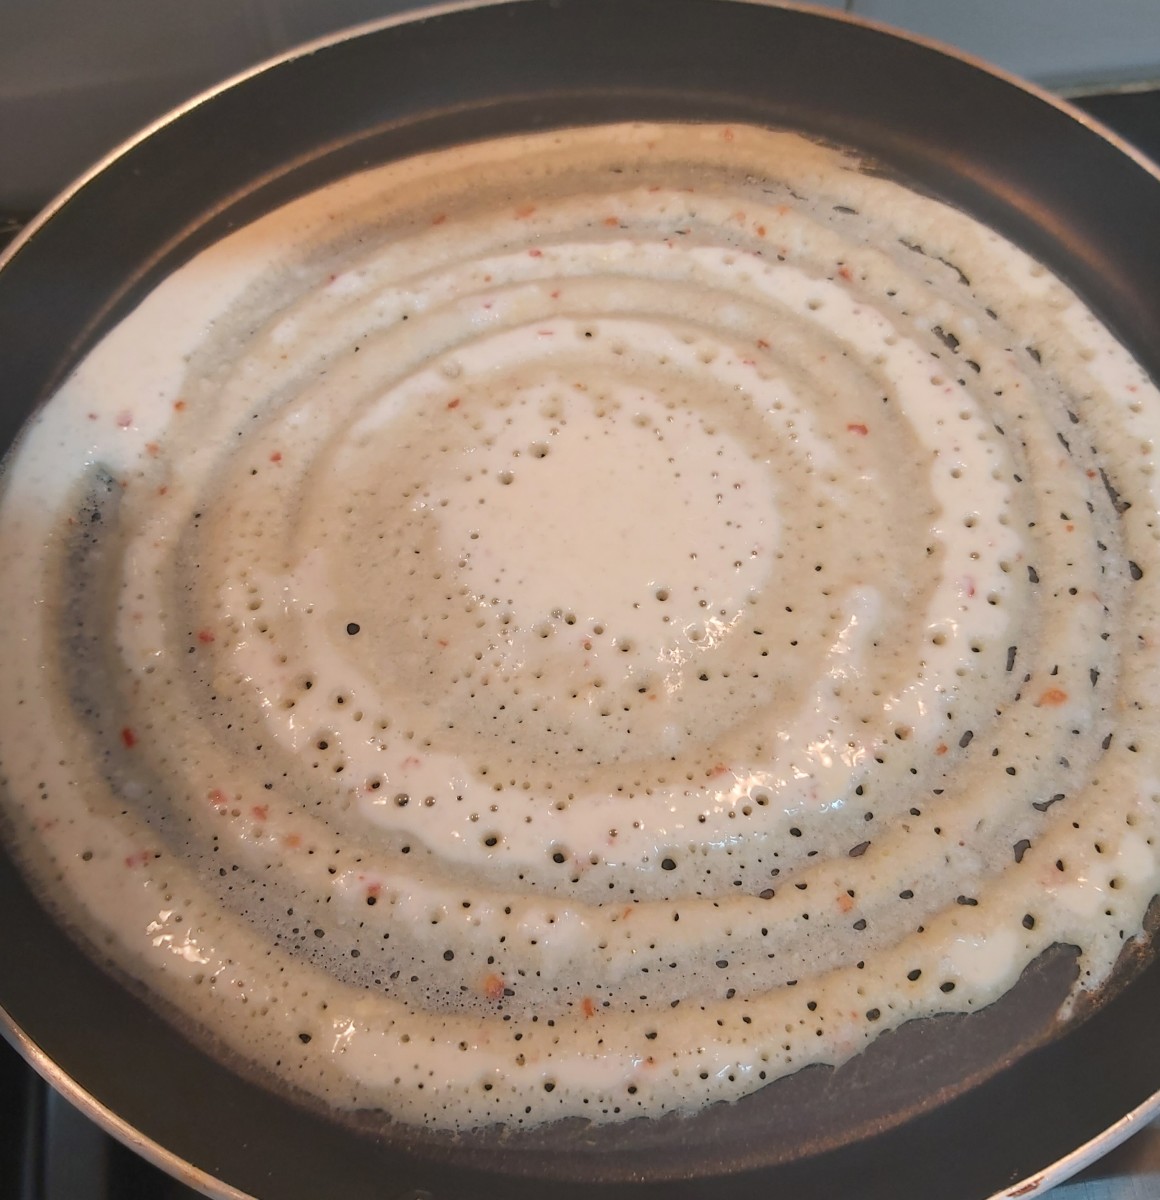 Heat the tawa on high flame. Pour a ladleful of batter on tawa and spread it gently. Sprinkle some drops of oil or ghee on top of dosa (optional).